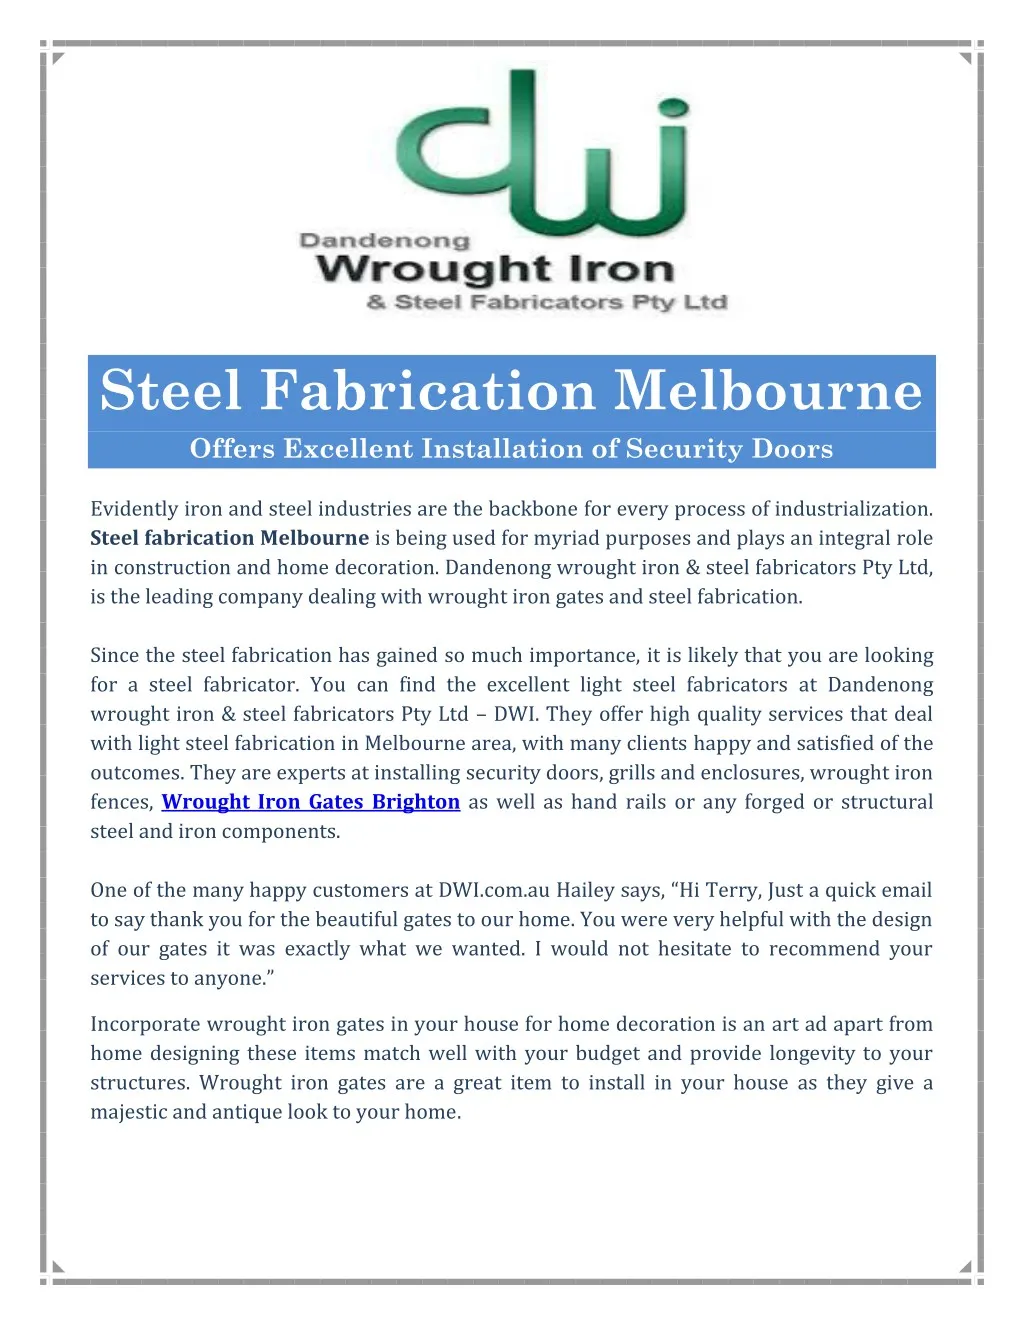 steel fabrication melbourne offers excellent